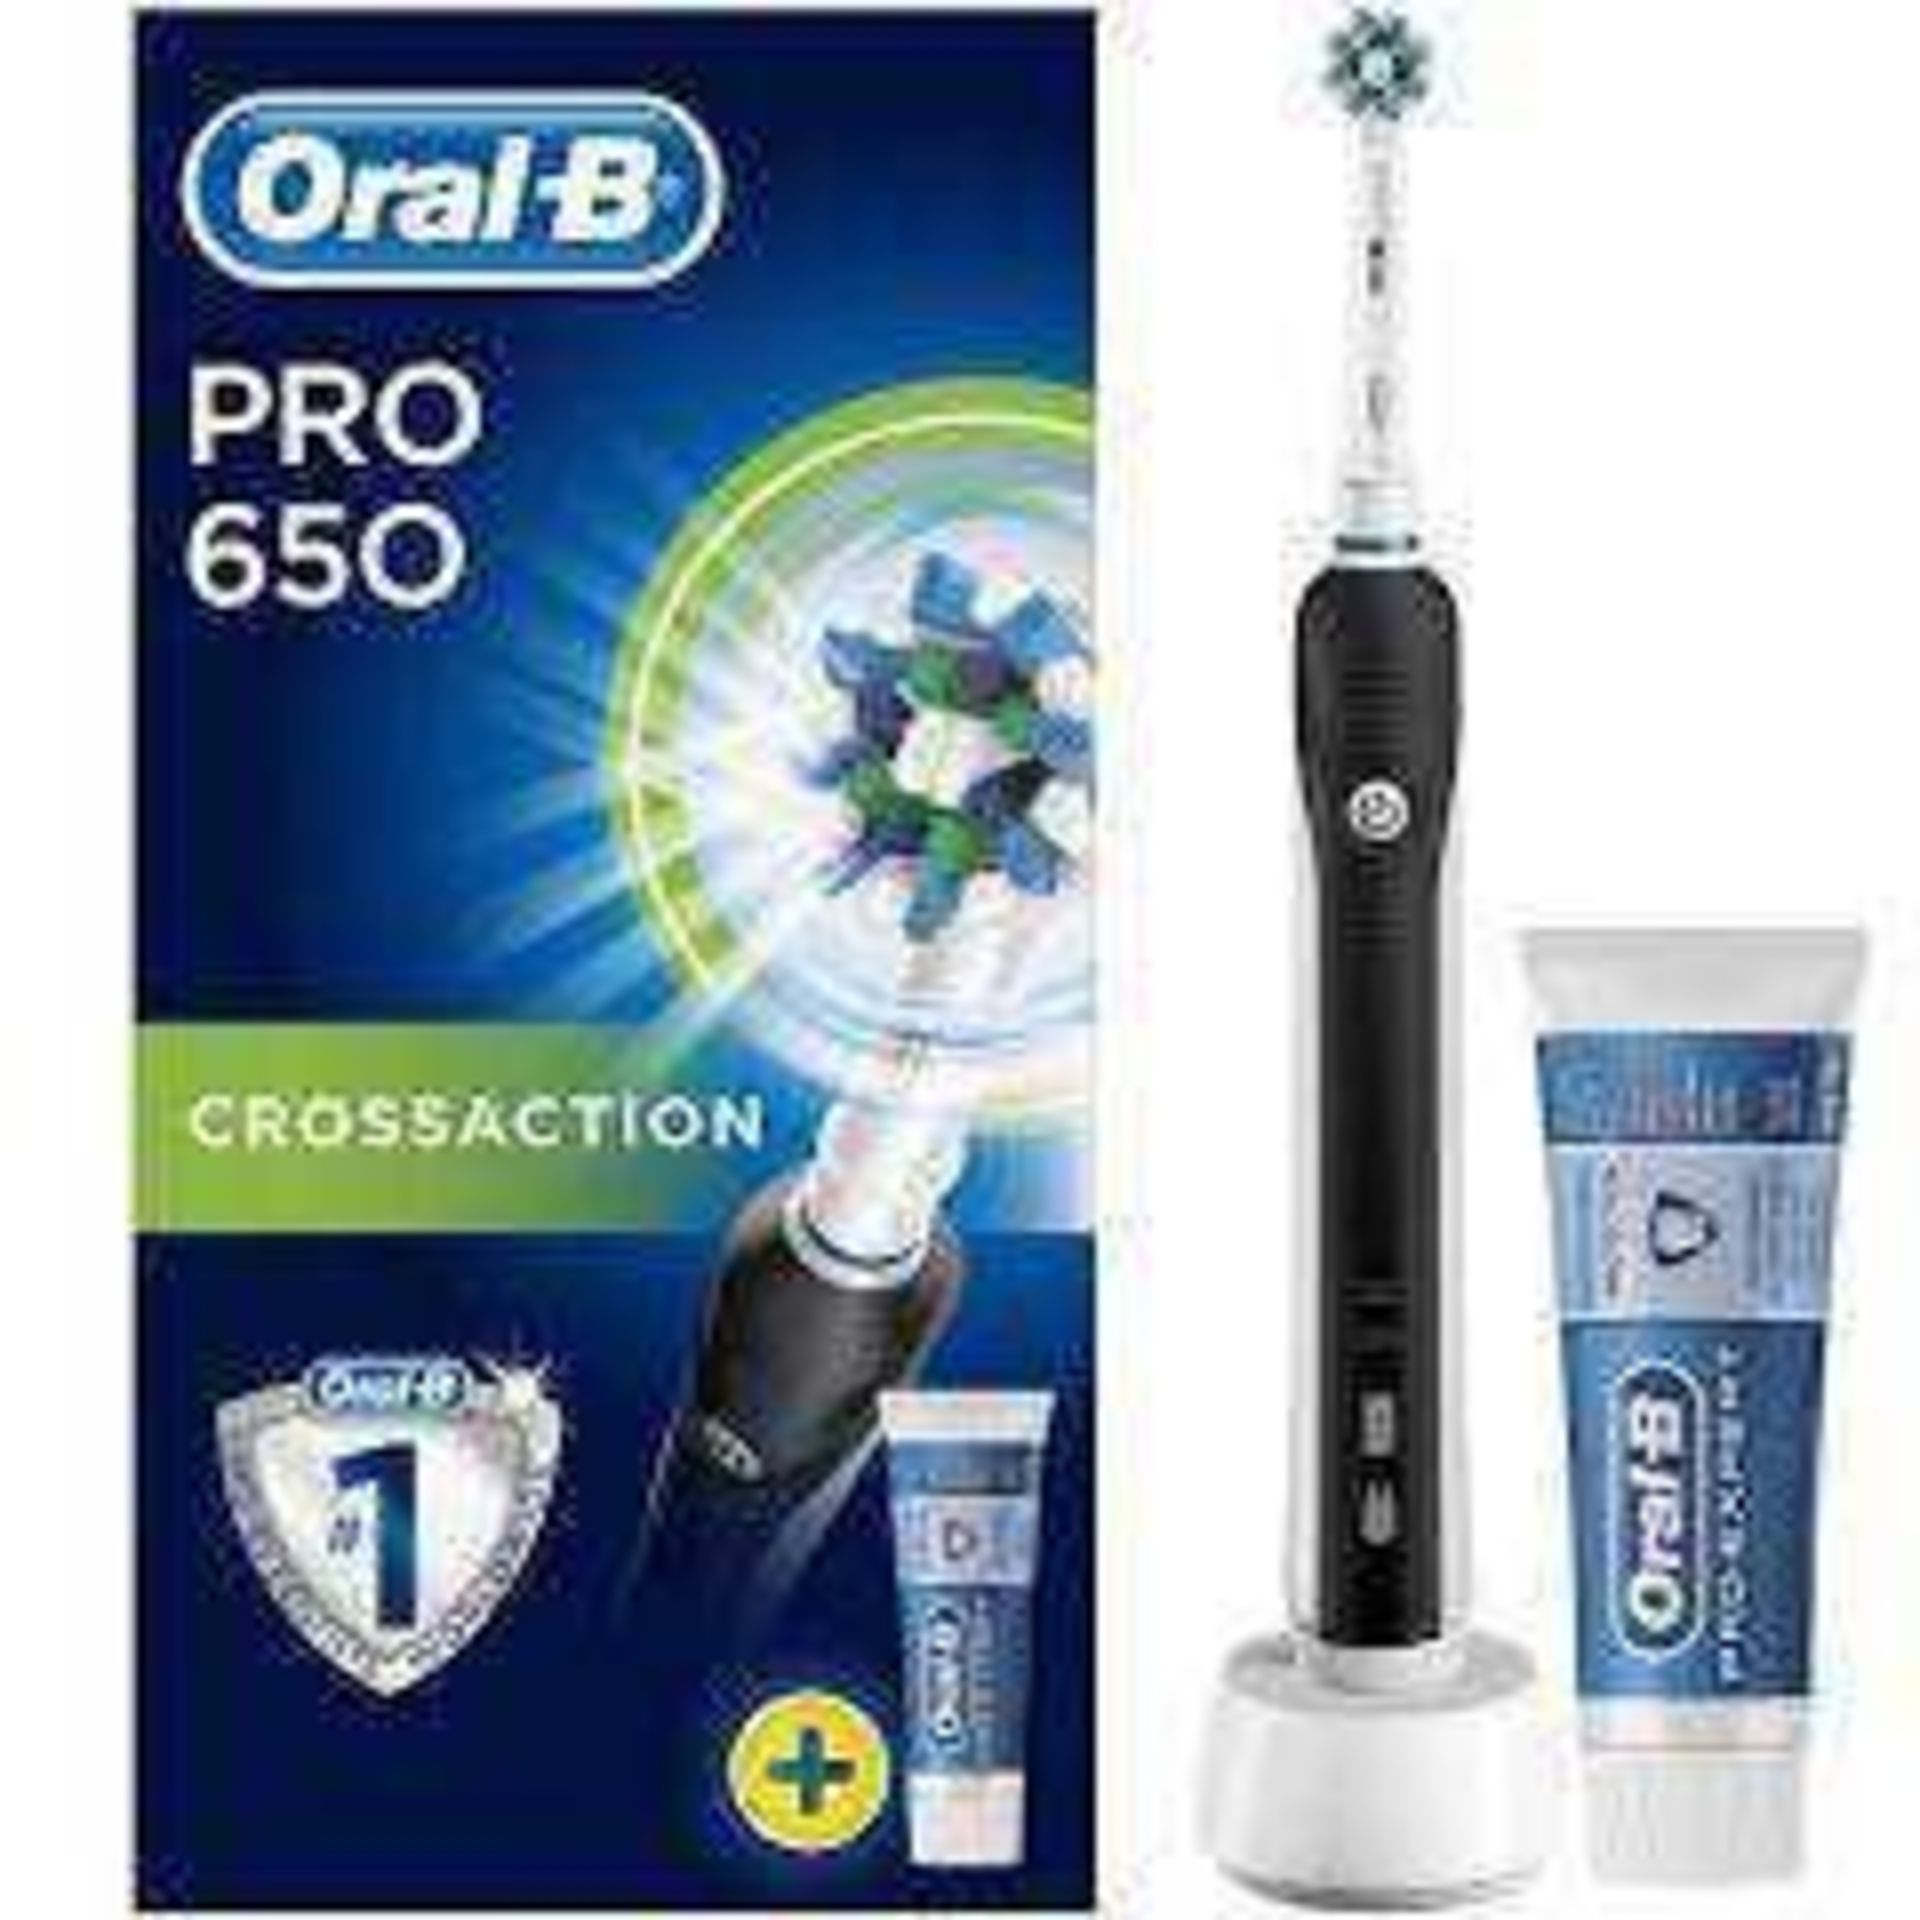 Combined RRP £180 Lot To Contain 3 Boxed Oral B Pr - Image 3 of 3